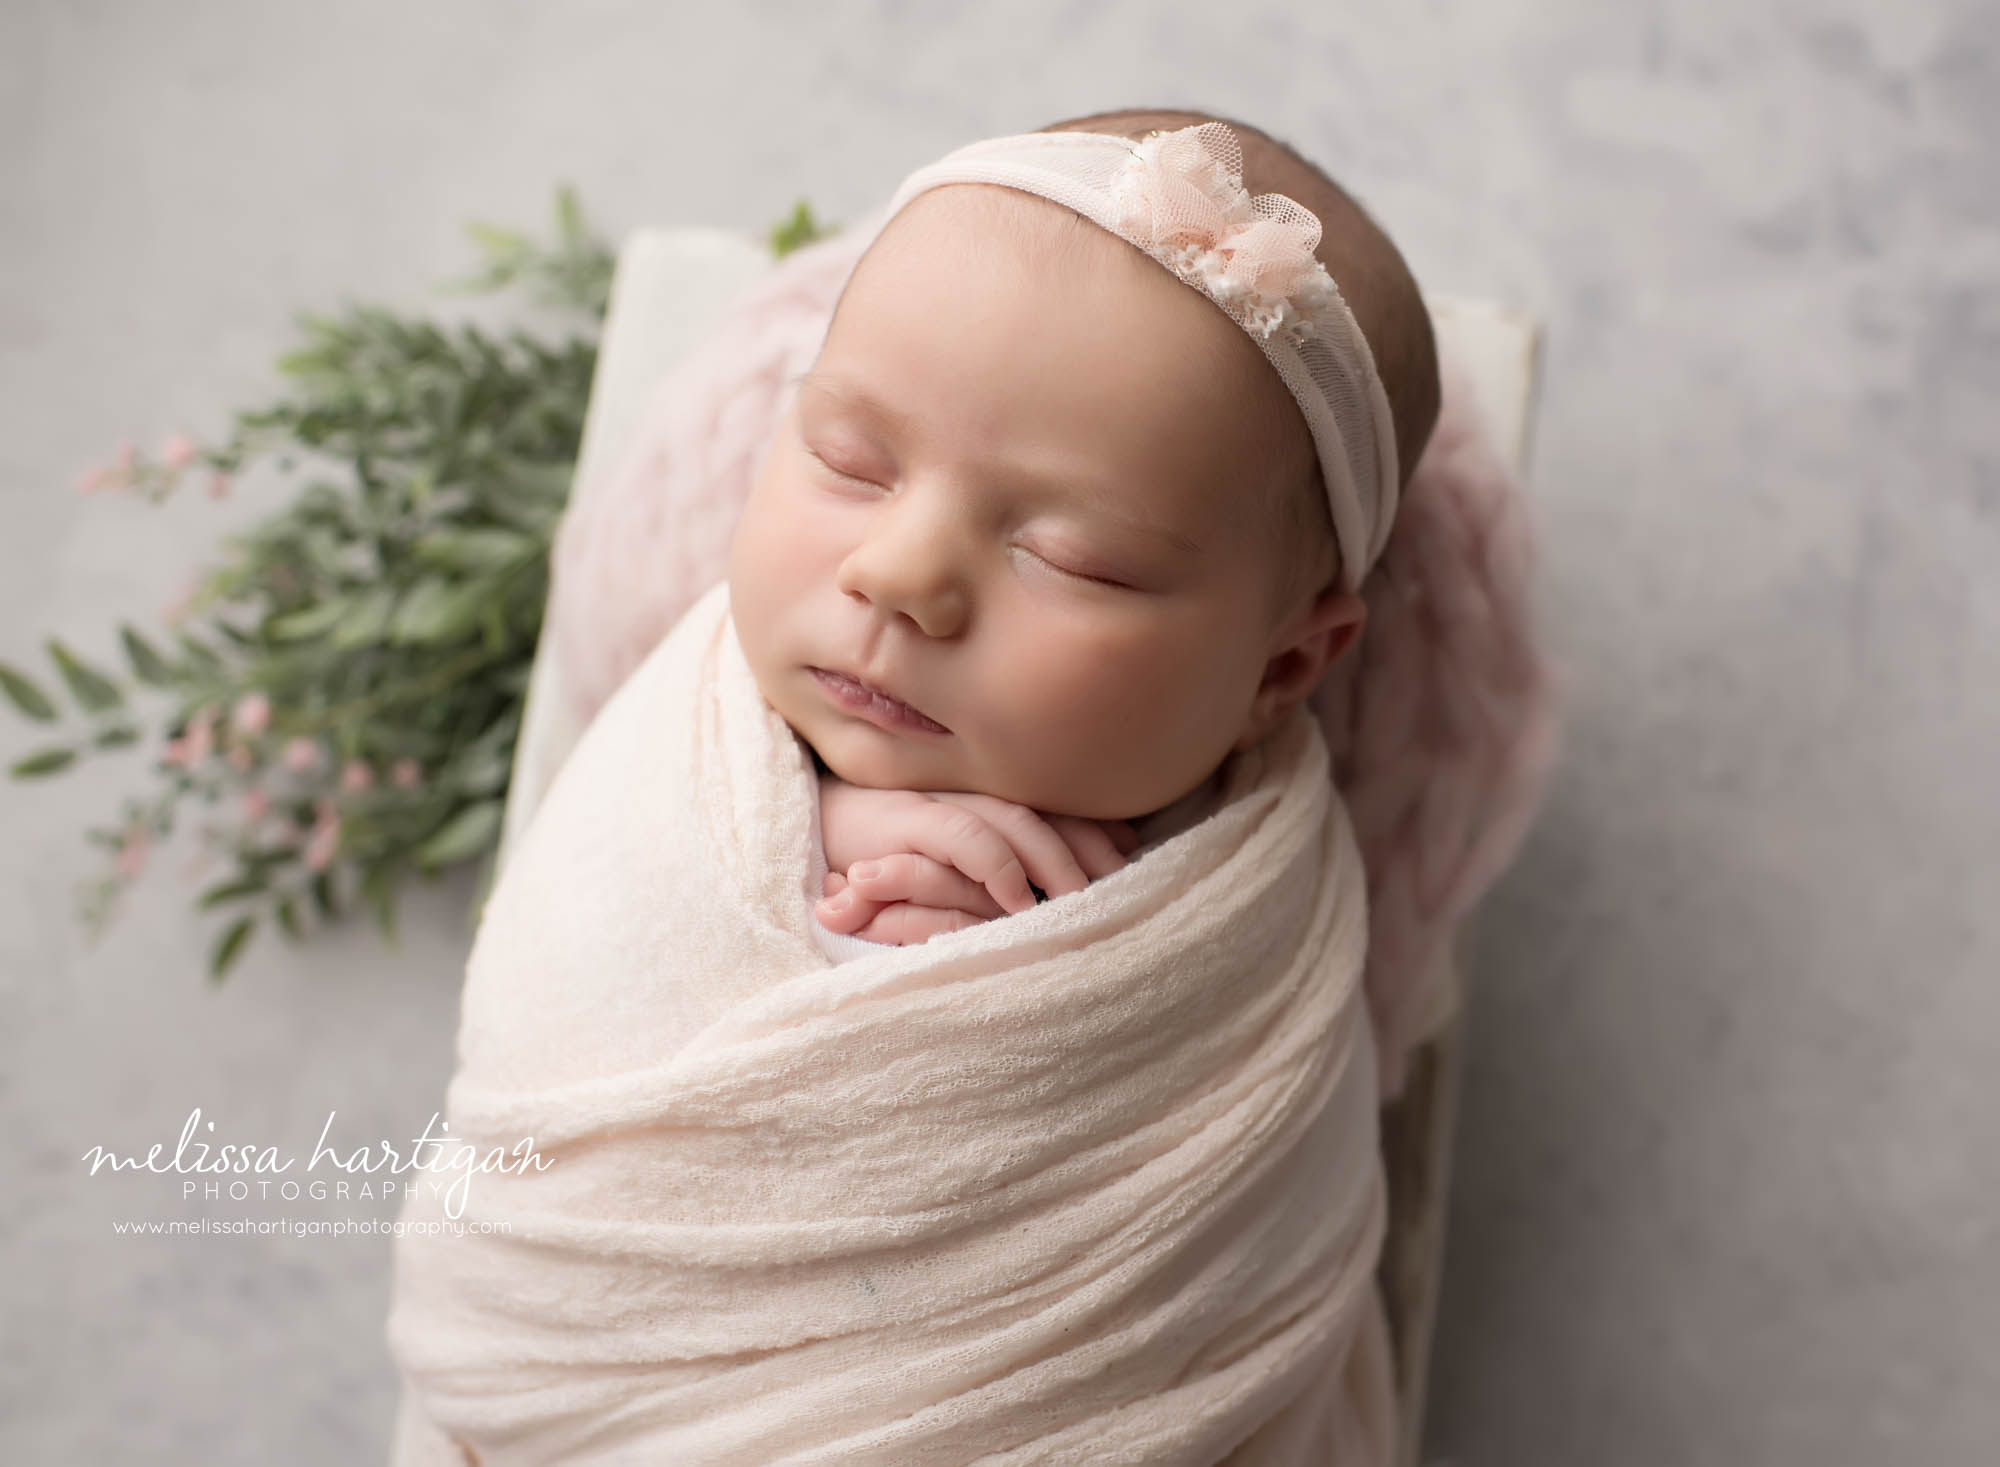 Newborn baby girl wrapped in faint light pink wrap and bow headband